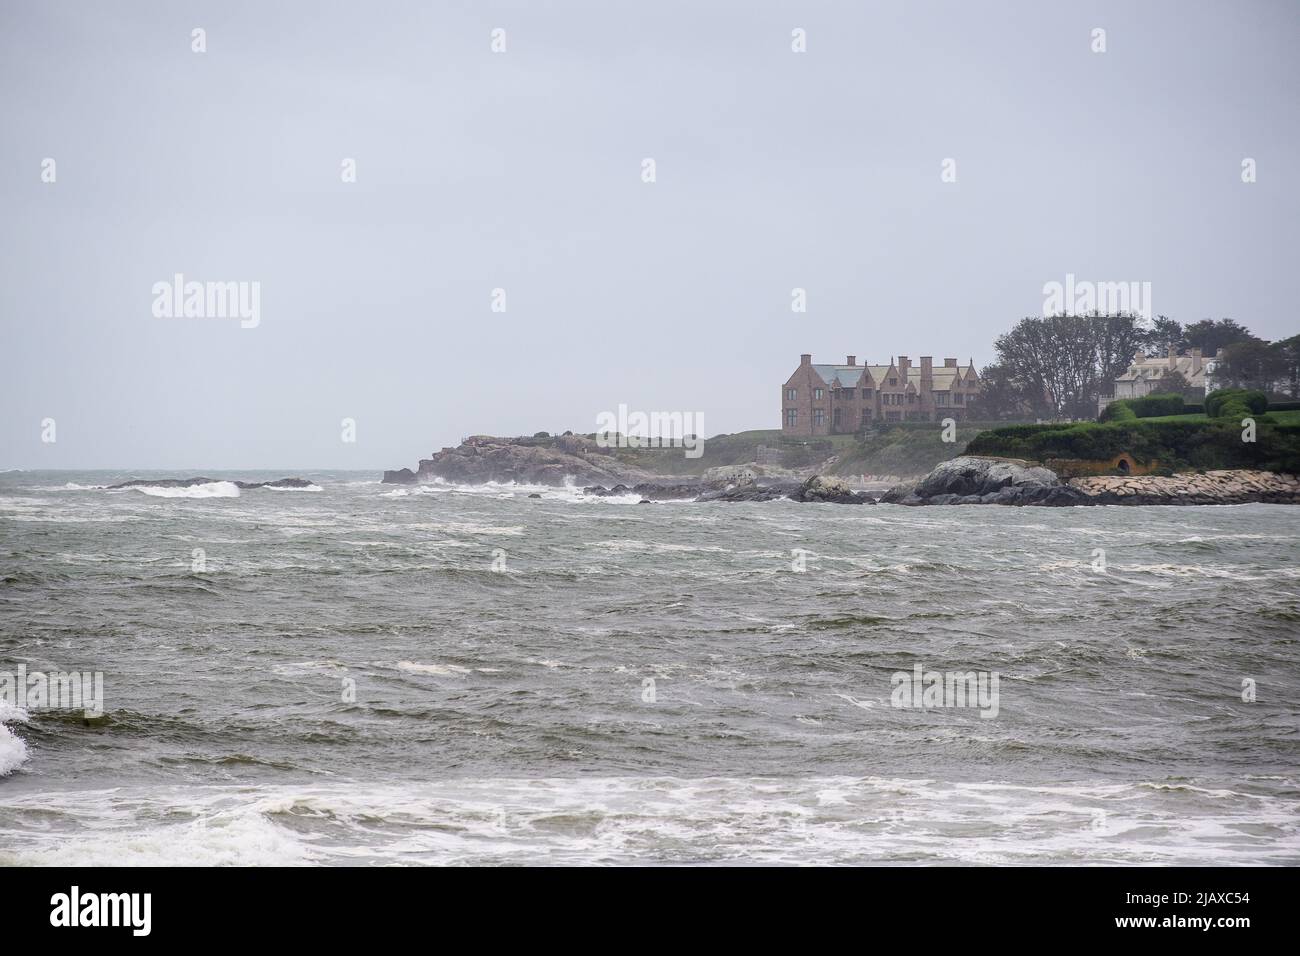 Stock photos of tropical storm Henri in 2021, Newport, RI. Stock photos of hurricane. Stock photos of extreme weather. Breaking Waves, Crashing Waves. Stock Photo